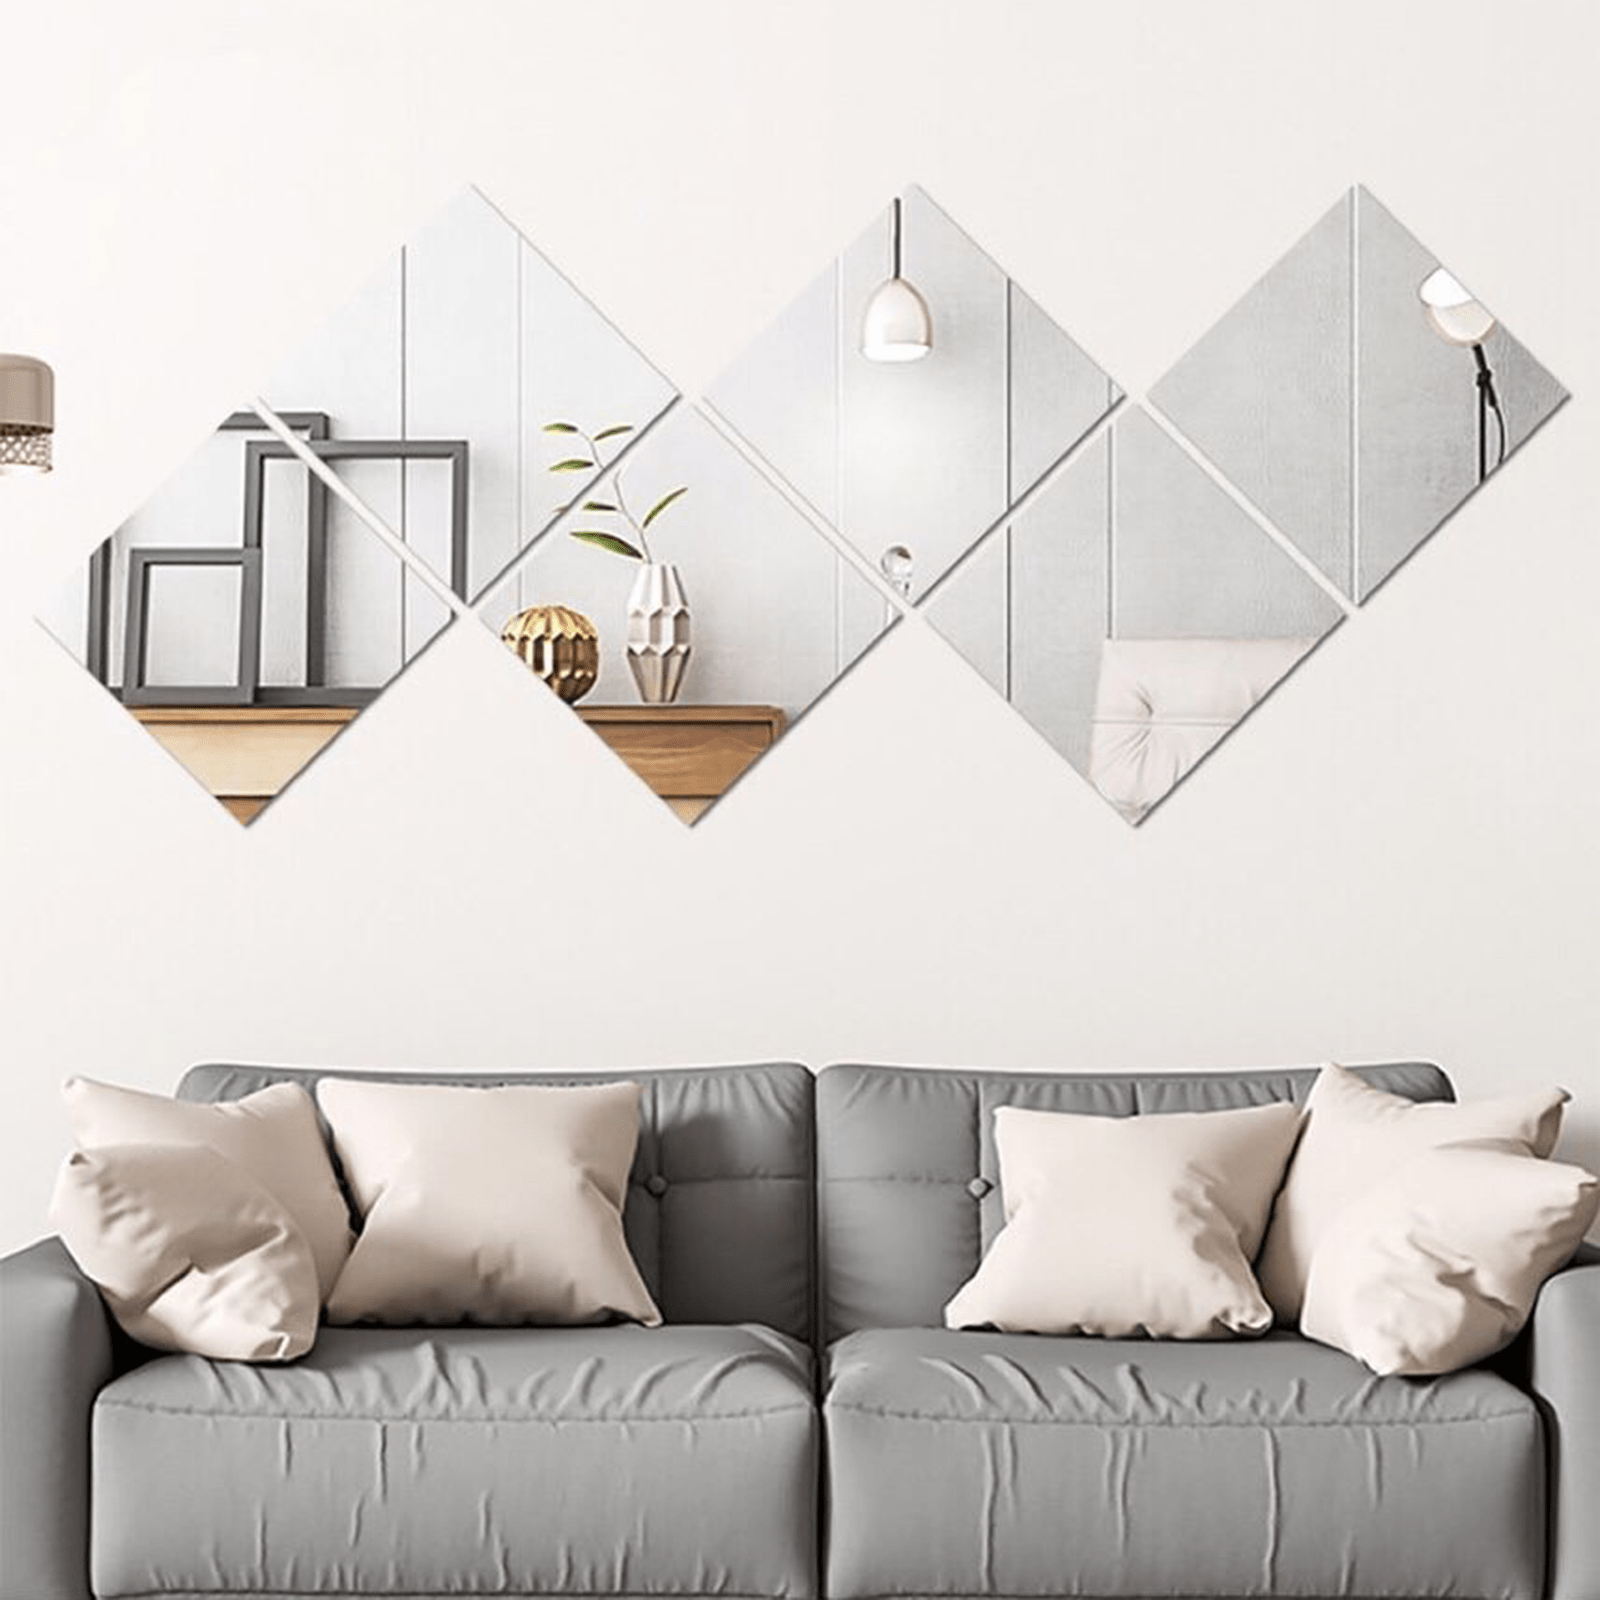 Self Adhesive Mirror Tiles DIY Wall Stickers Stick on Home Living Room Art  Decor